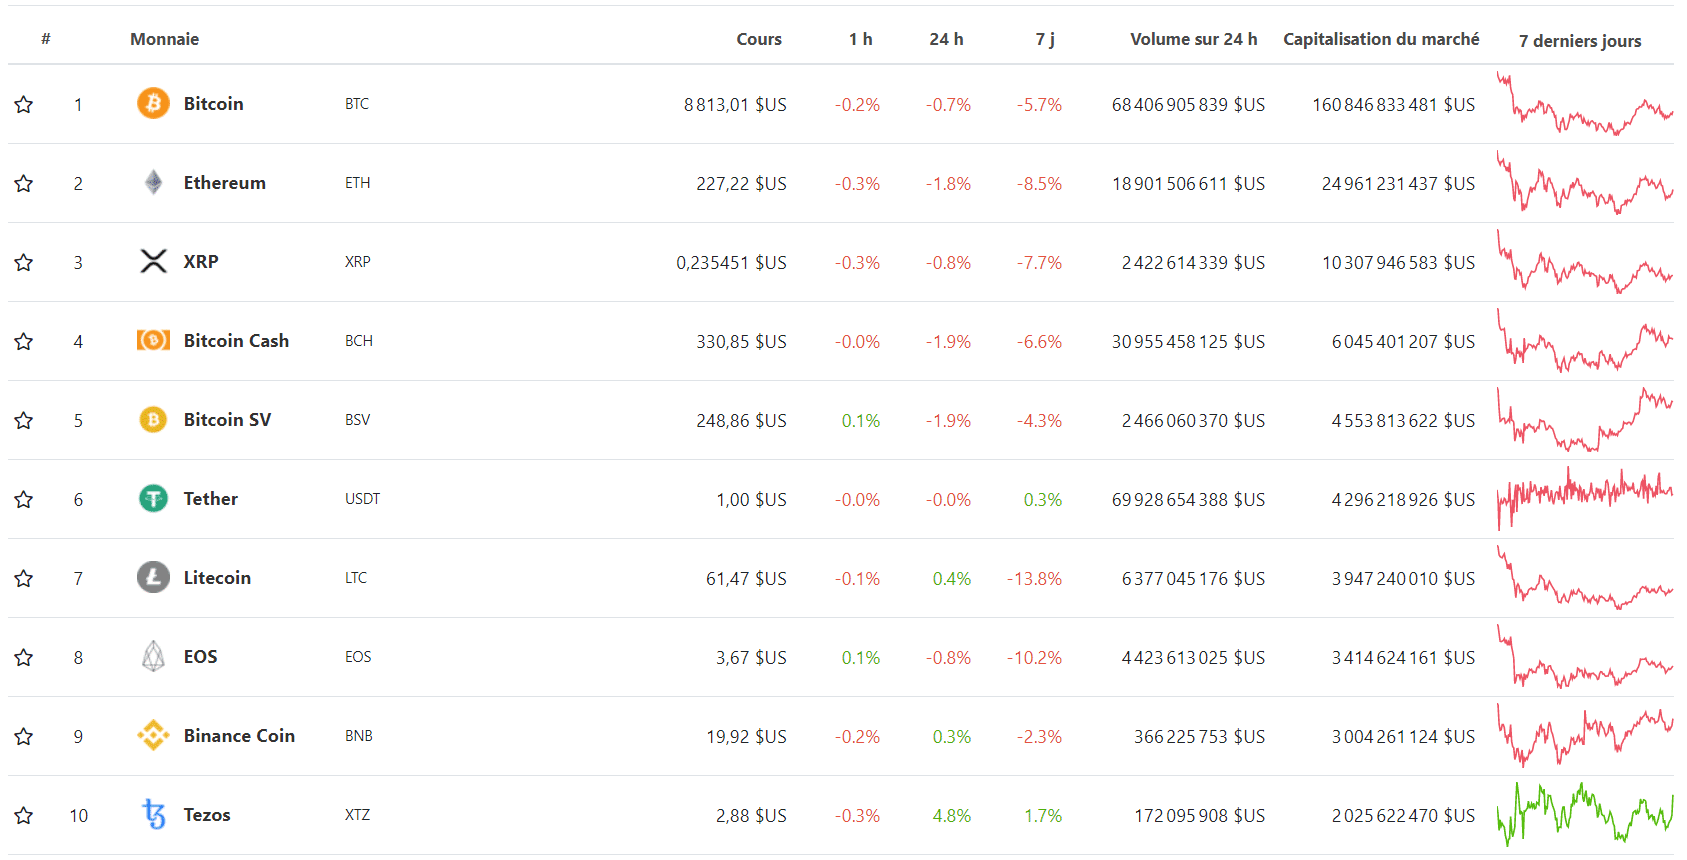 Top 10 cryptocurrencies by market capitalization